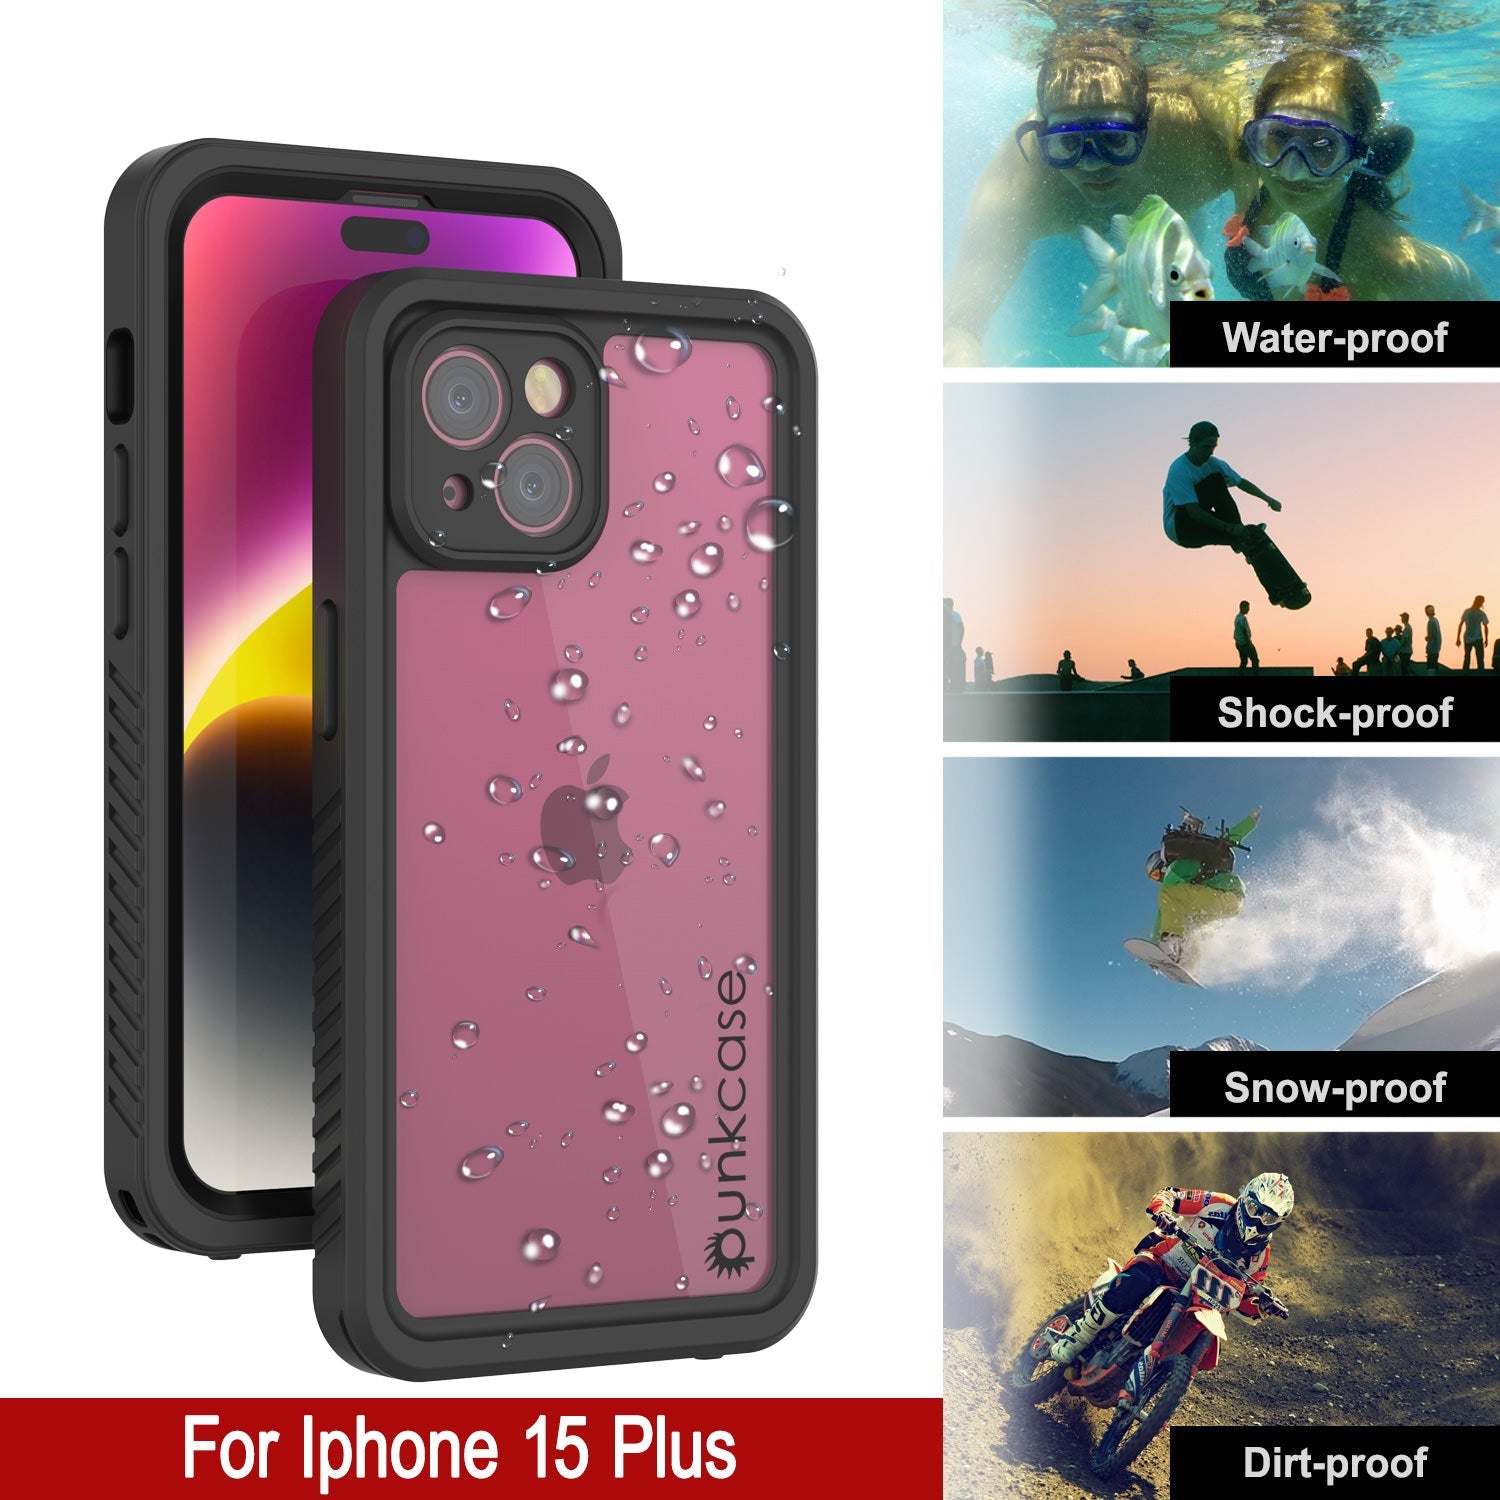 iPhone 15 Plus Waterproof Case, Punkcase [Extreme Series] Armor Cover W/ Built In Screen Protector [Black]